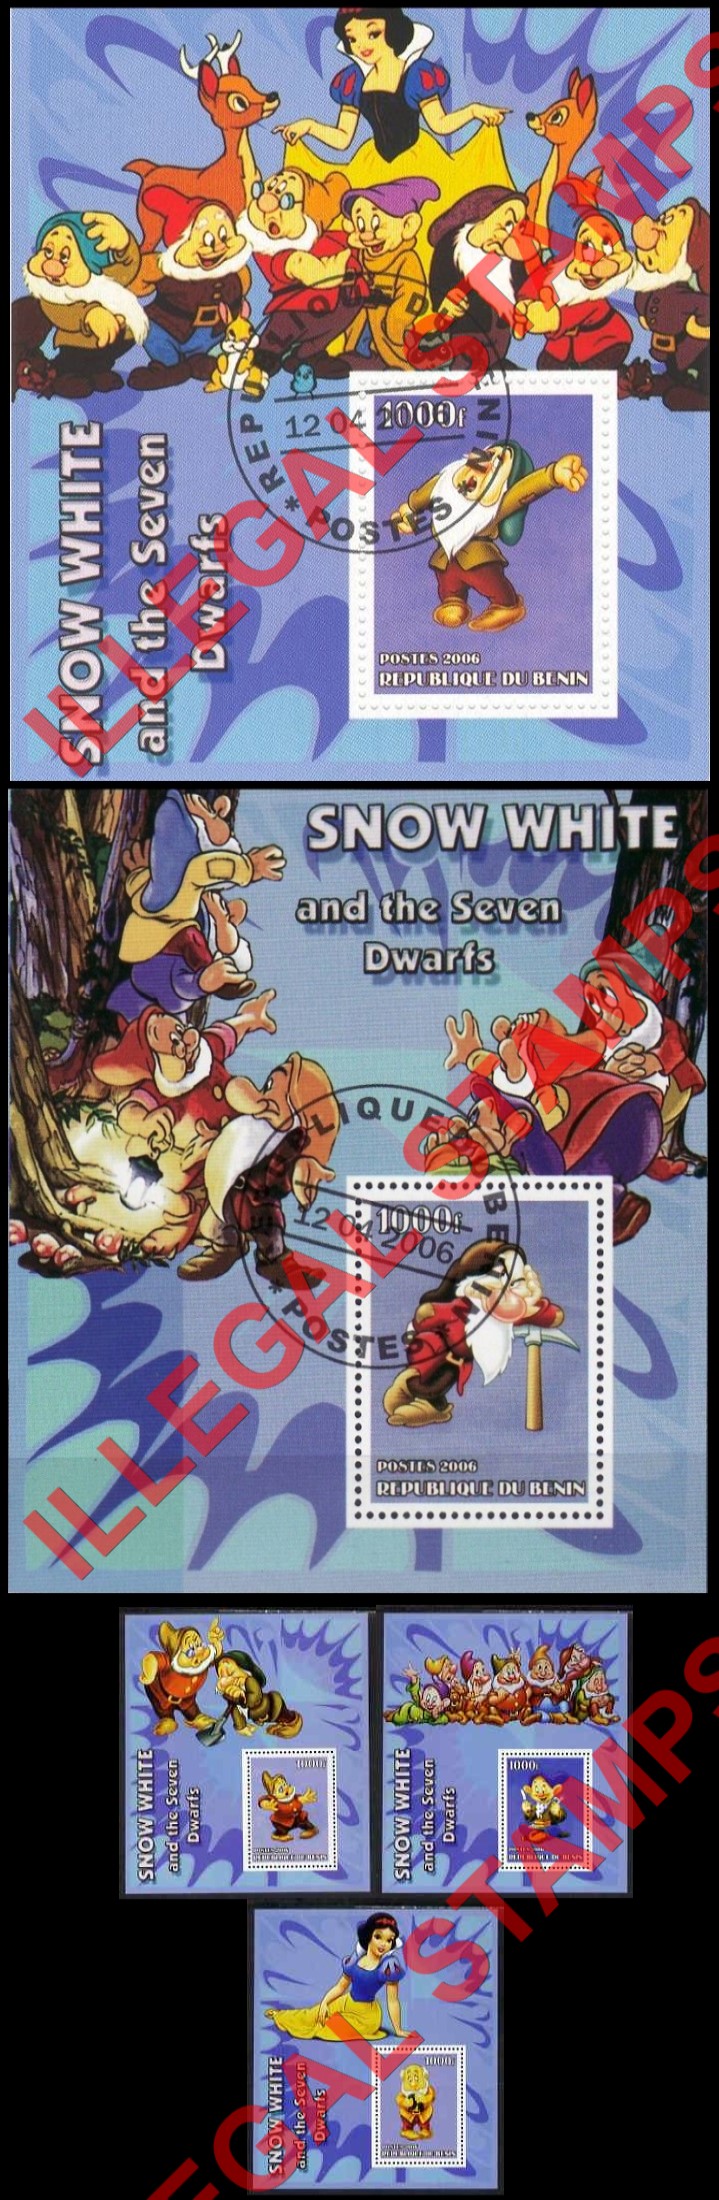 Benin 2006 Snow White and the Seven Dwarfs Illegal Stamp Souvenir Sheets of 1 (Part 2)